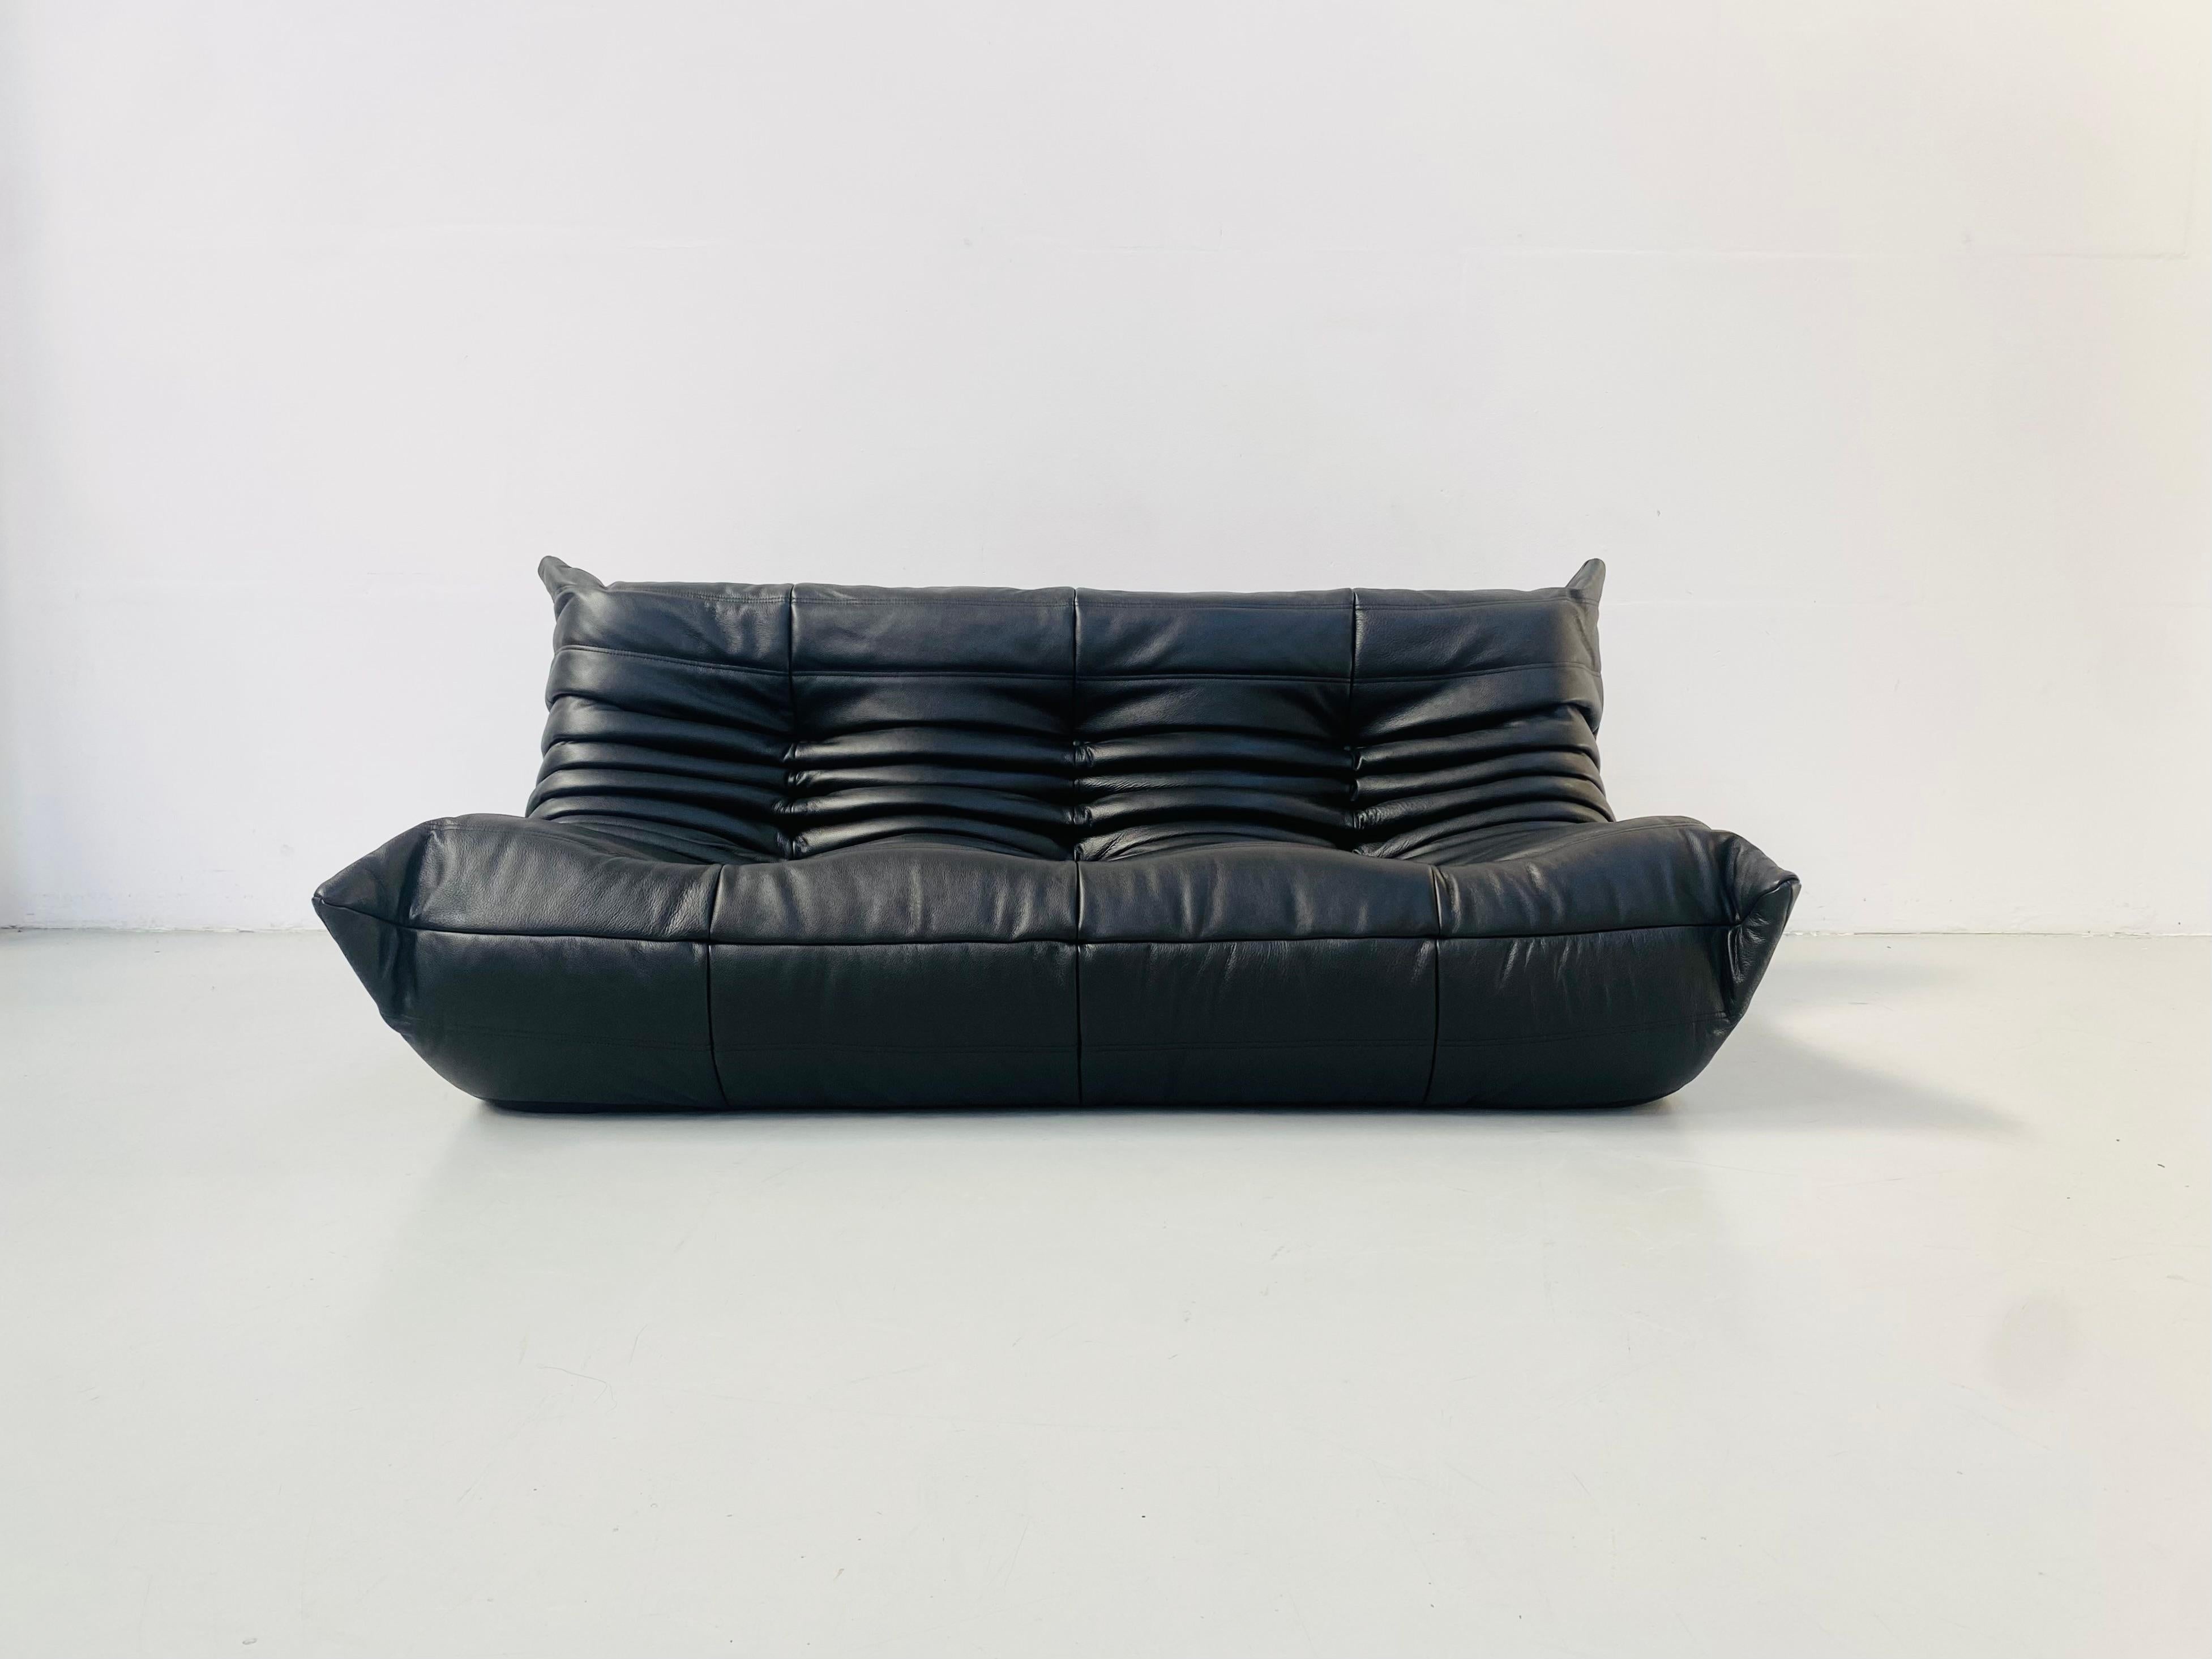 Mid-Century Modern French Togo Sofa in Black Leather by Michel Ducaroy for Ligne Roset. For Sale